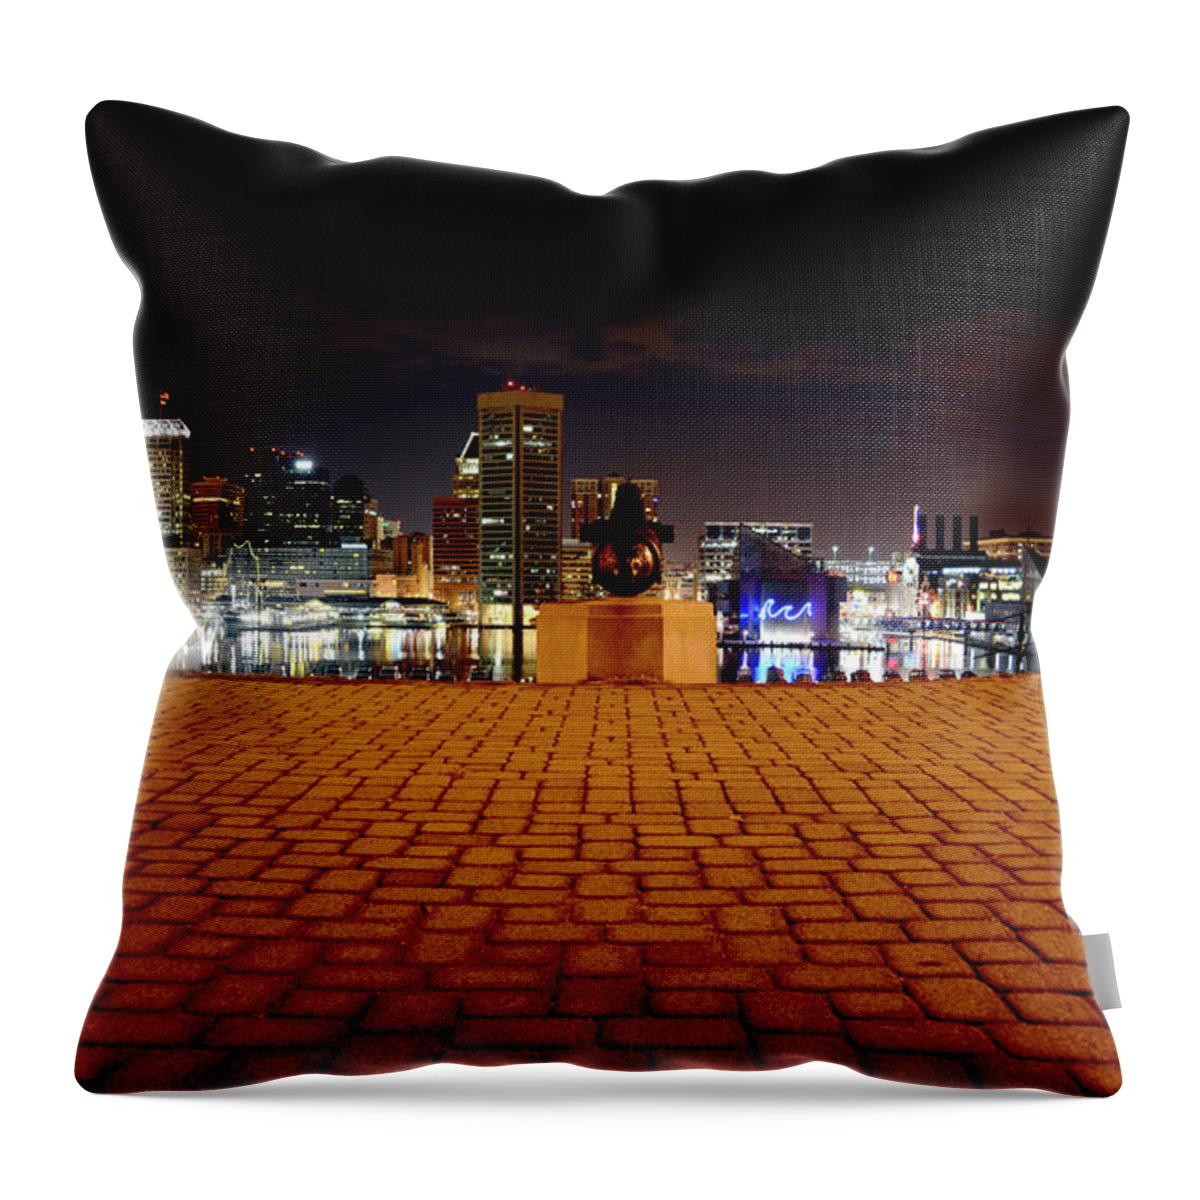 Baltimore Throw Pillow featuring the photograph Charm City Skyline by La Dolce Vita